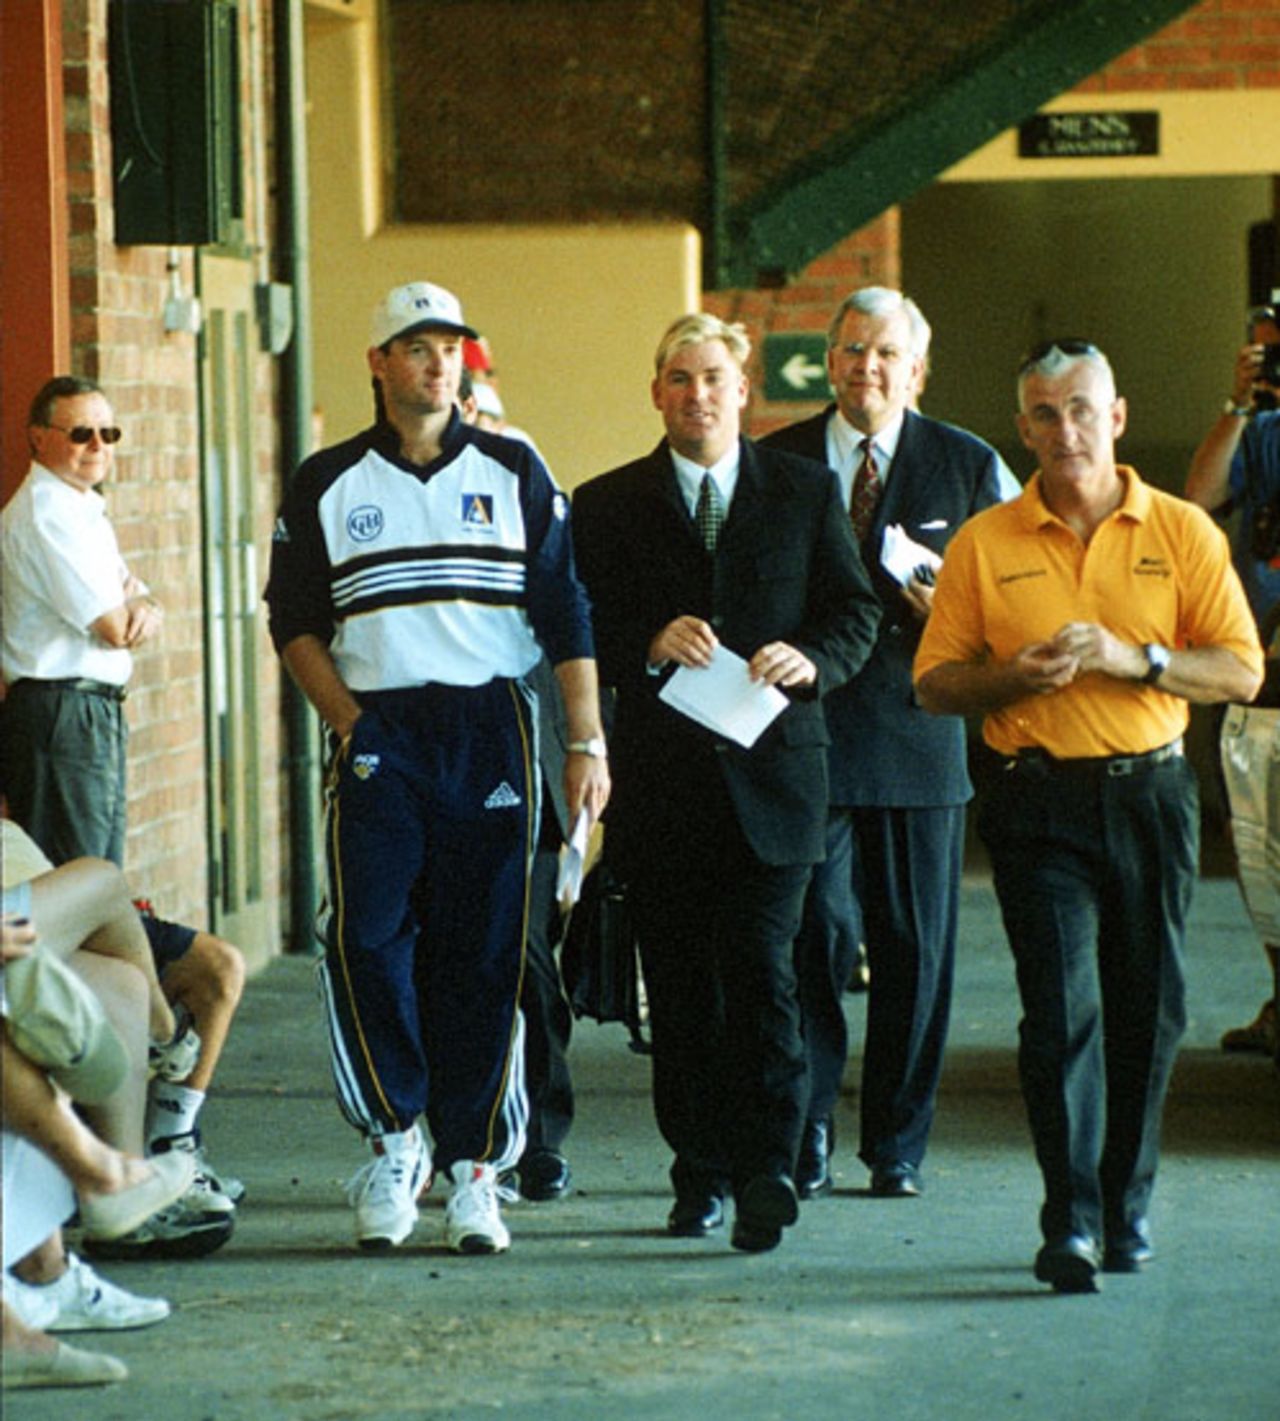 Mark Waugh, Shane Warne and Malcolm Speed arrive for a press conference after admitting to accepting money from an Indian bookmaker before a one-day match in 1994, Adelaide, 9 December 1998